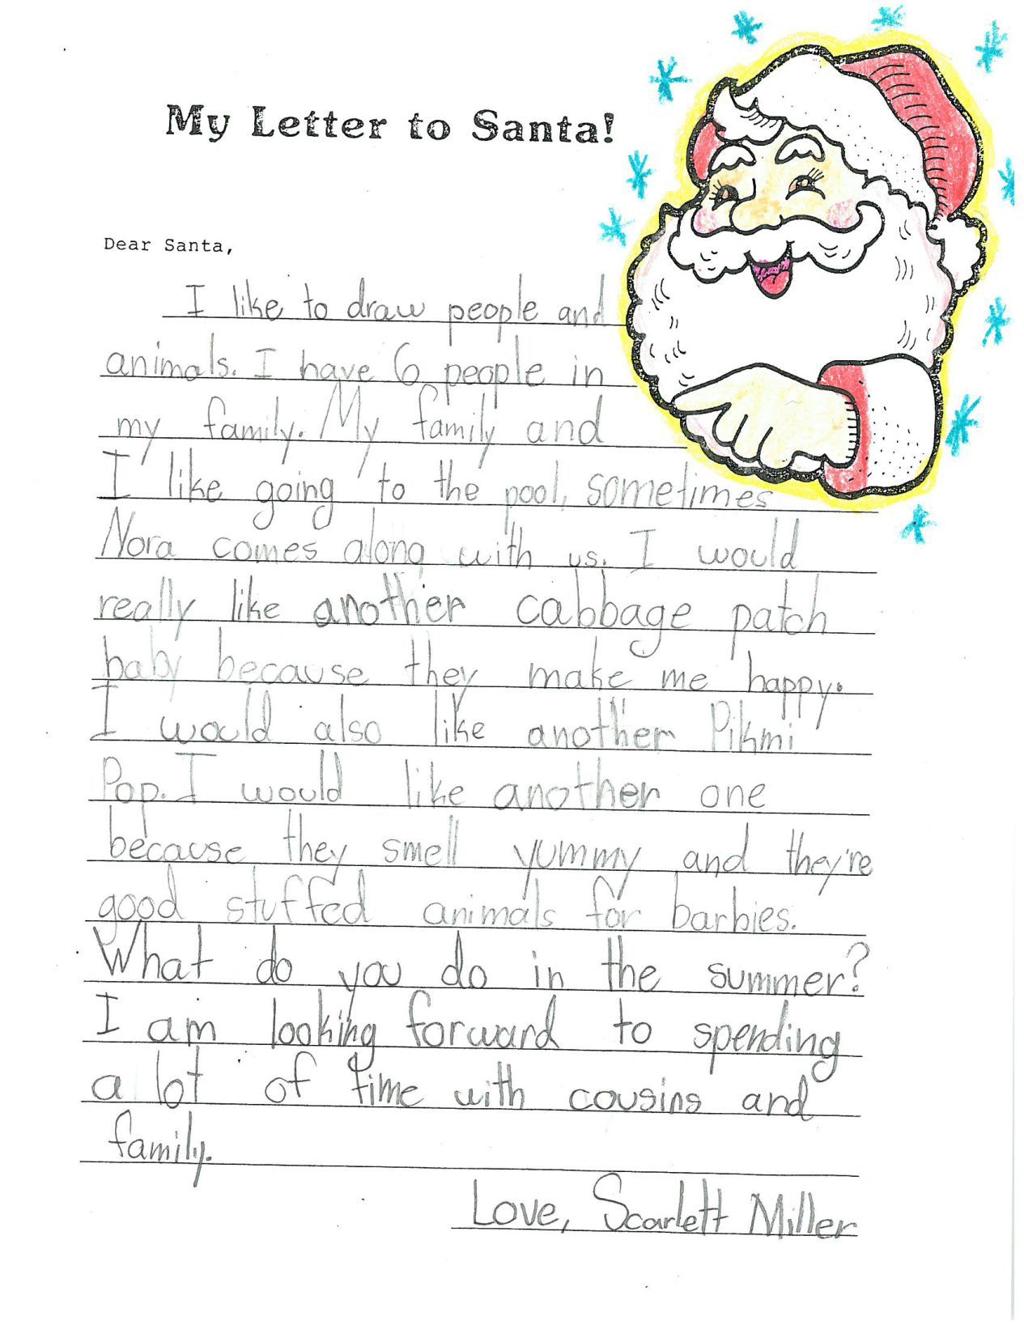 Letters To Santa News Globegazette Com - when your 6 year old cousin is trying to make the roblox